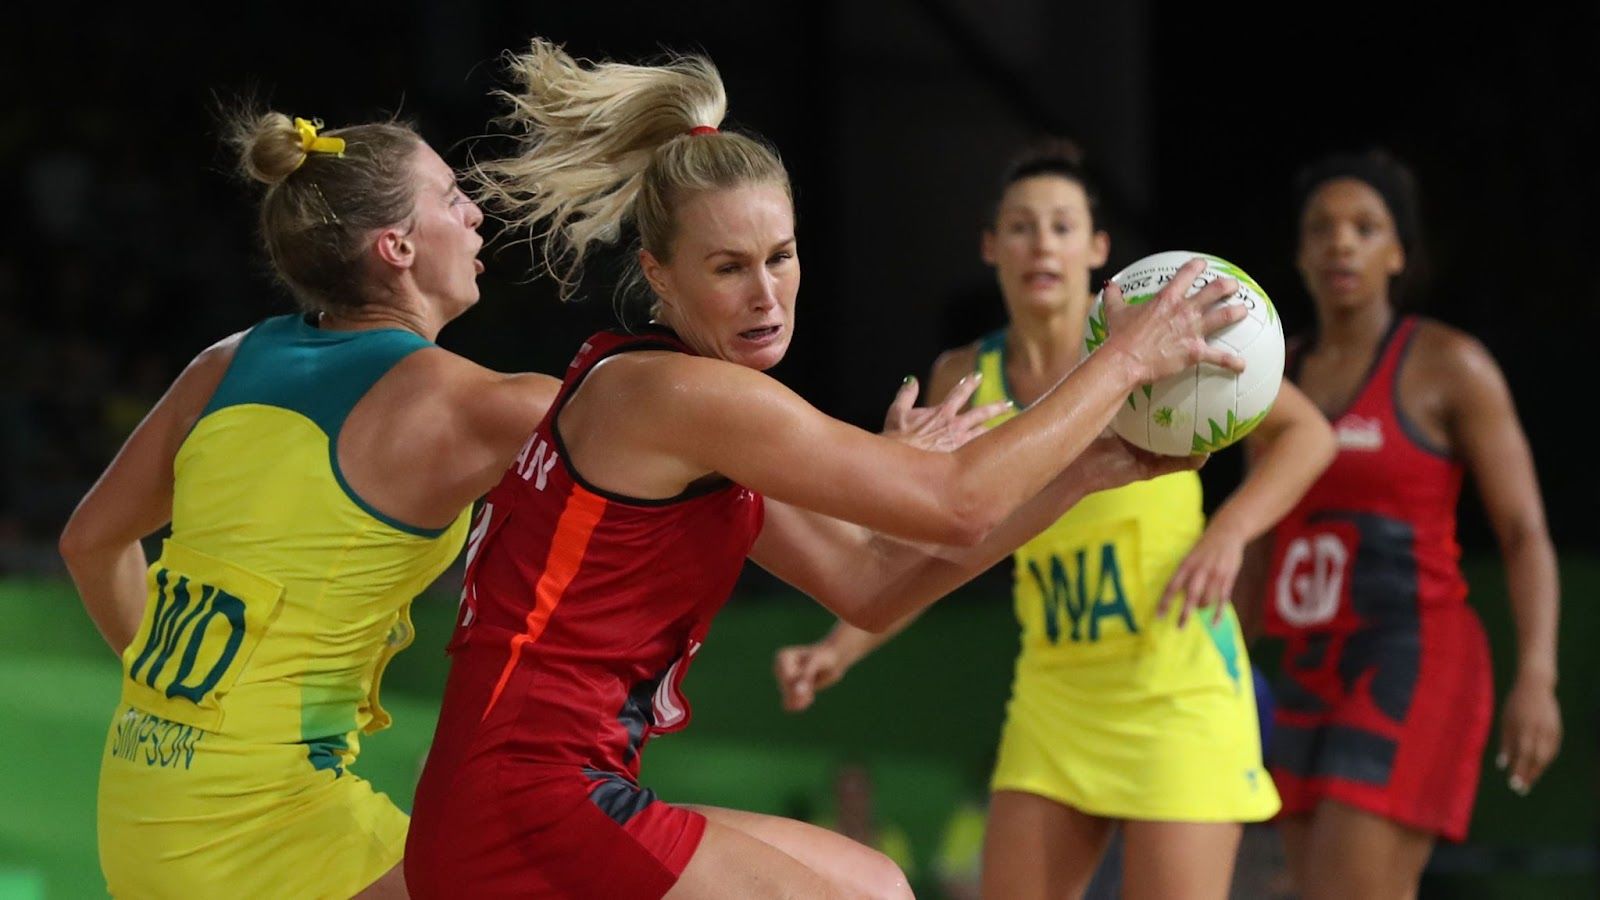 Netball: England set to host Australia, New Zealand, and South Africa